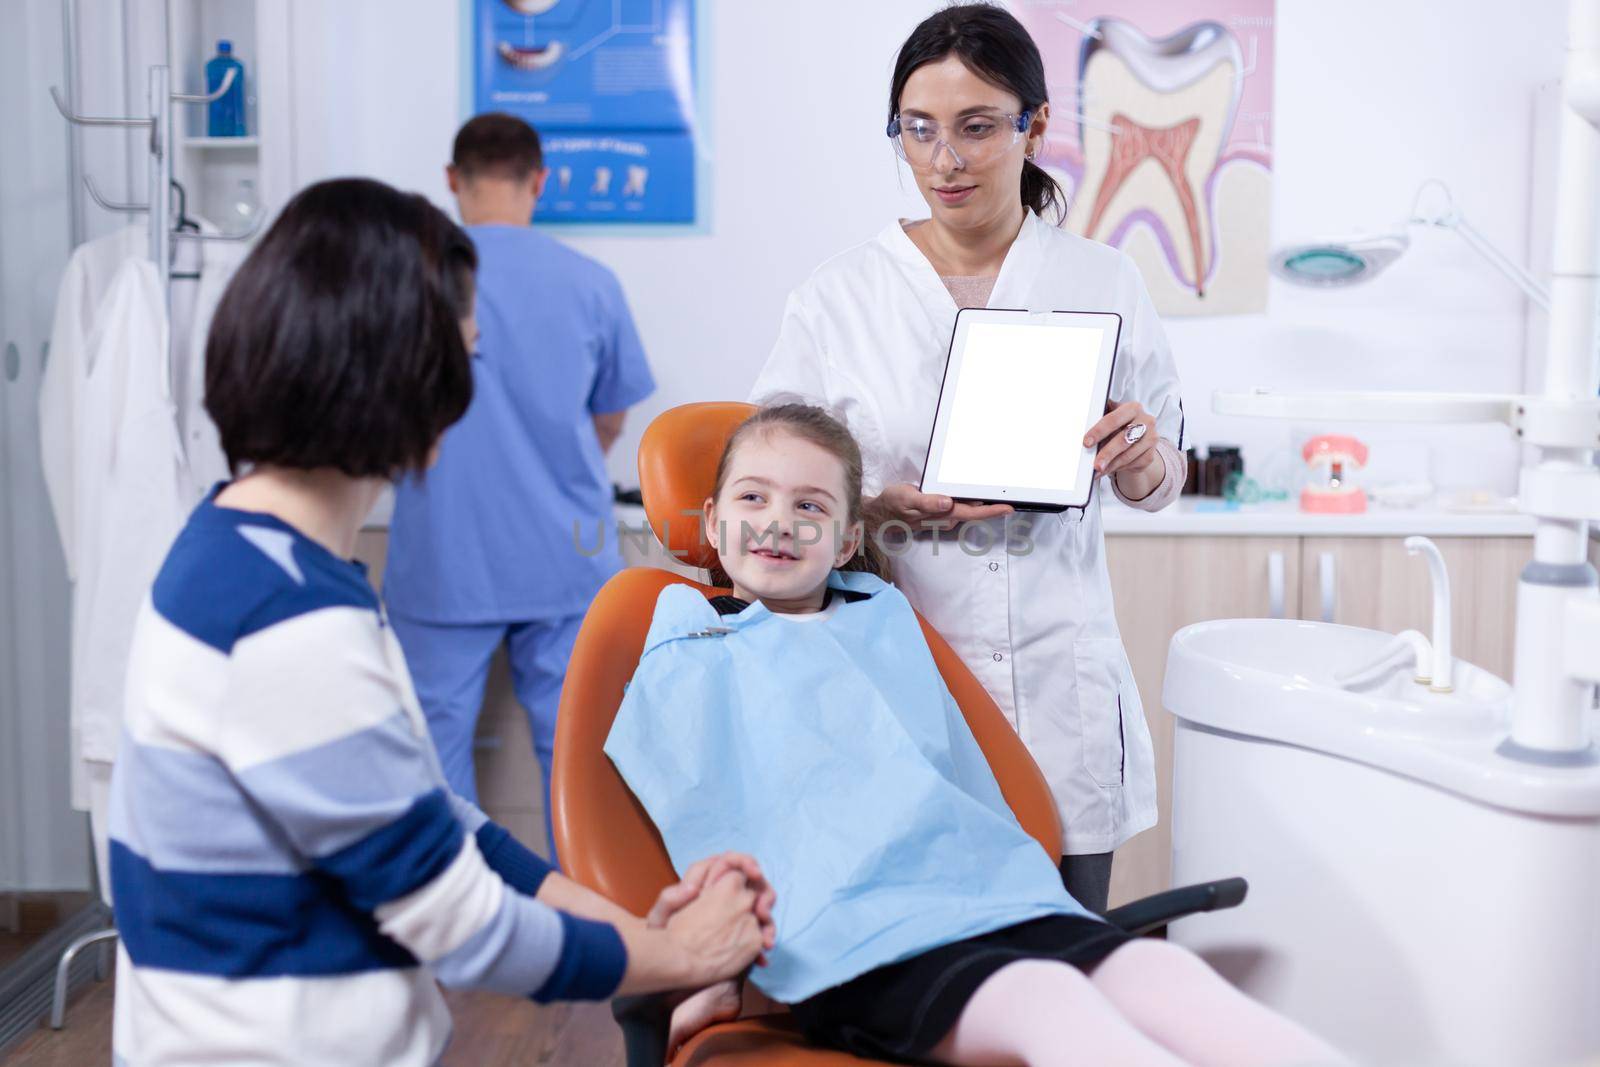 Little girl wearing dental bib in the course of dentistiry by DCStudio